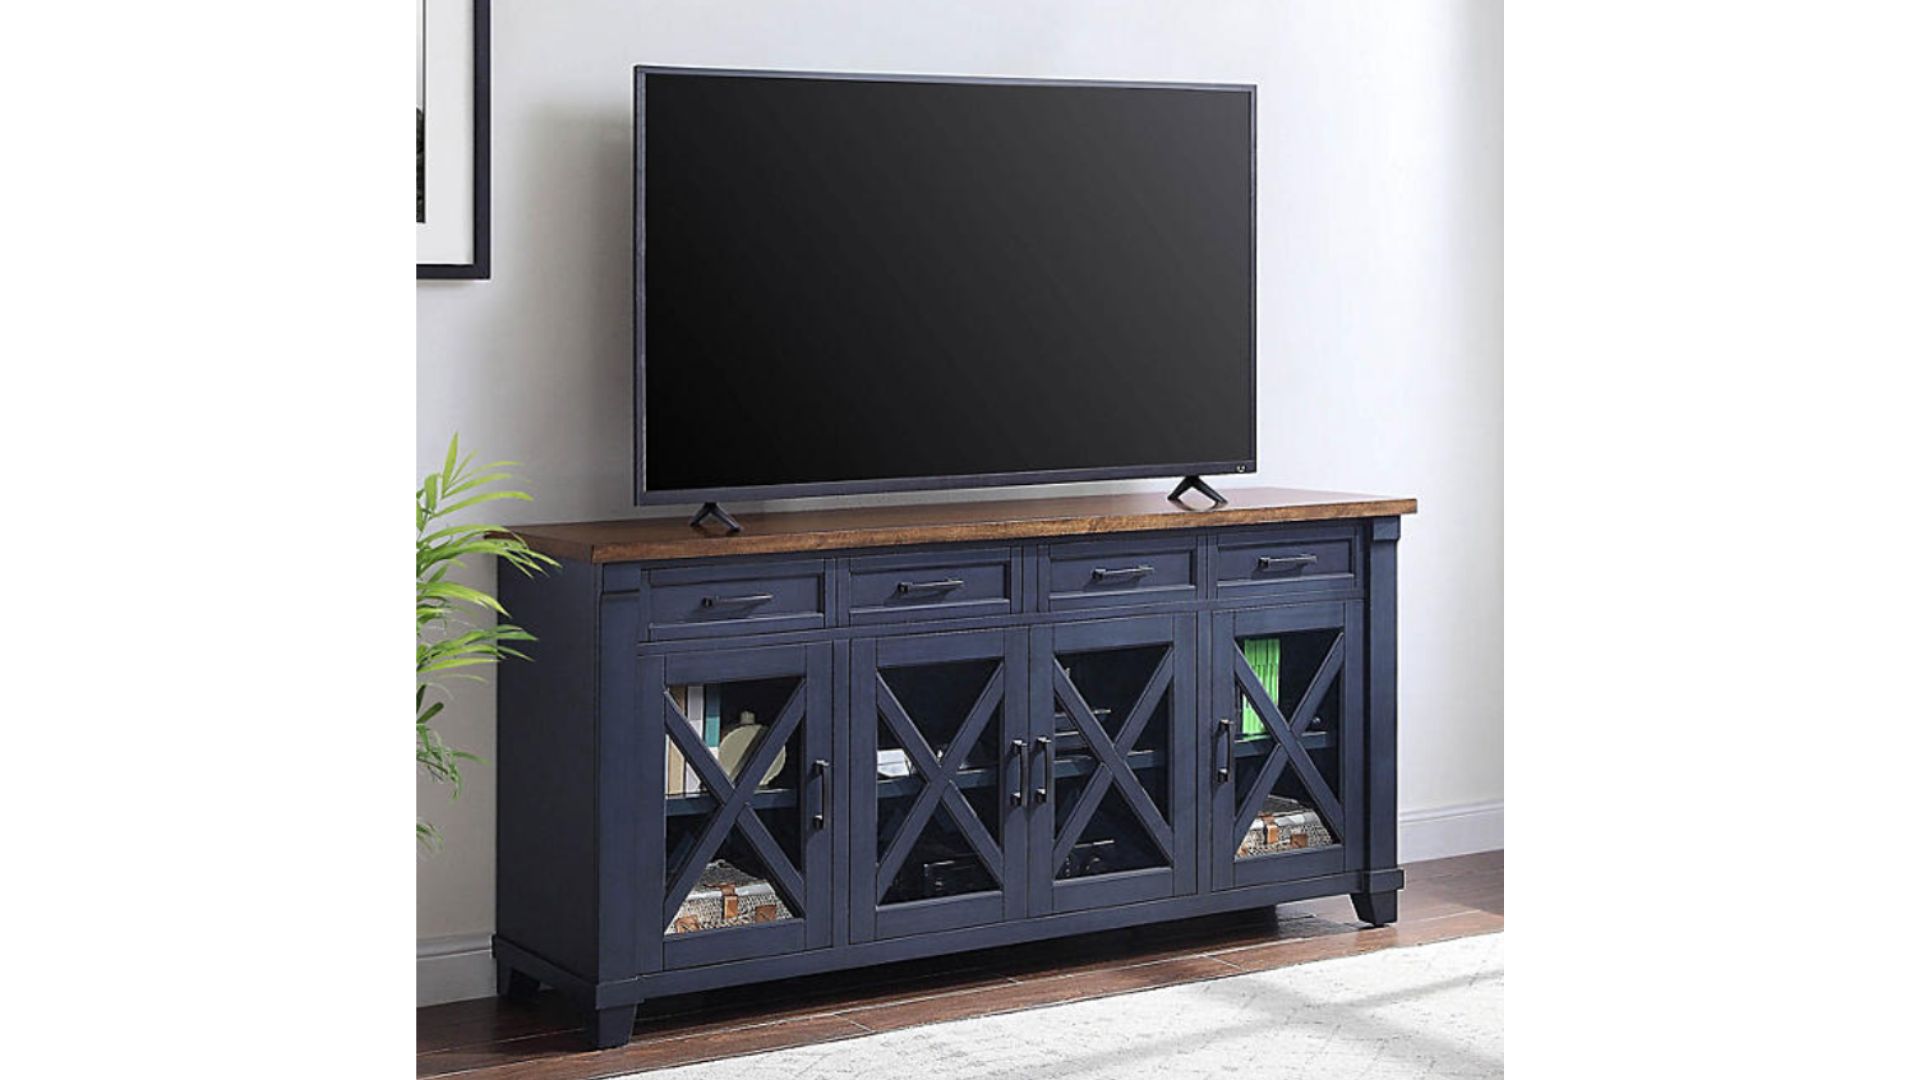 <ul> <li><strong>Price:</strong> <a href="https://www.samsclub.com/p/members-mark-livingston-70in-tv-console/prod25120169" rel="noreferrer noopener">$699.00</a></li> </ul> <p>What's the recurring complaint for the Member's Mark Livingston TV console? It has visible holes. A reviewer named Nikki complained there was a hole in the side of the console while several other reviewers expressed their frustration with the nail holes across the top.</p> <p>While Member's Mark said in a response that the holes being described are part of the console's distressed finish, the product still has 139 one-star reviews on the Sam's Club website.</p>